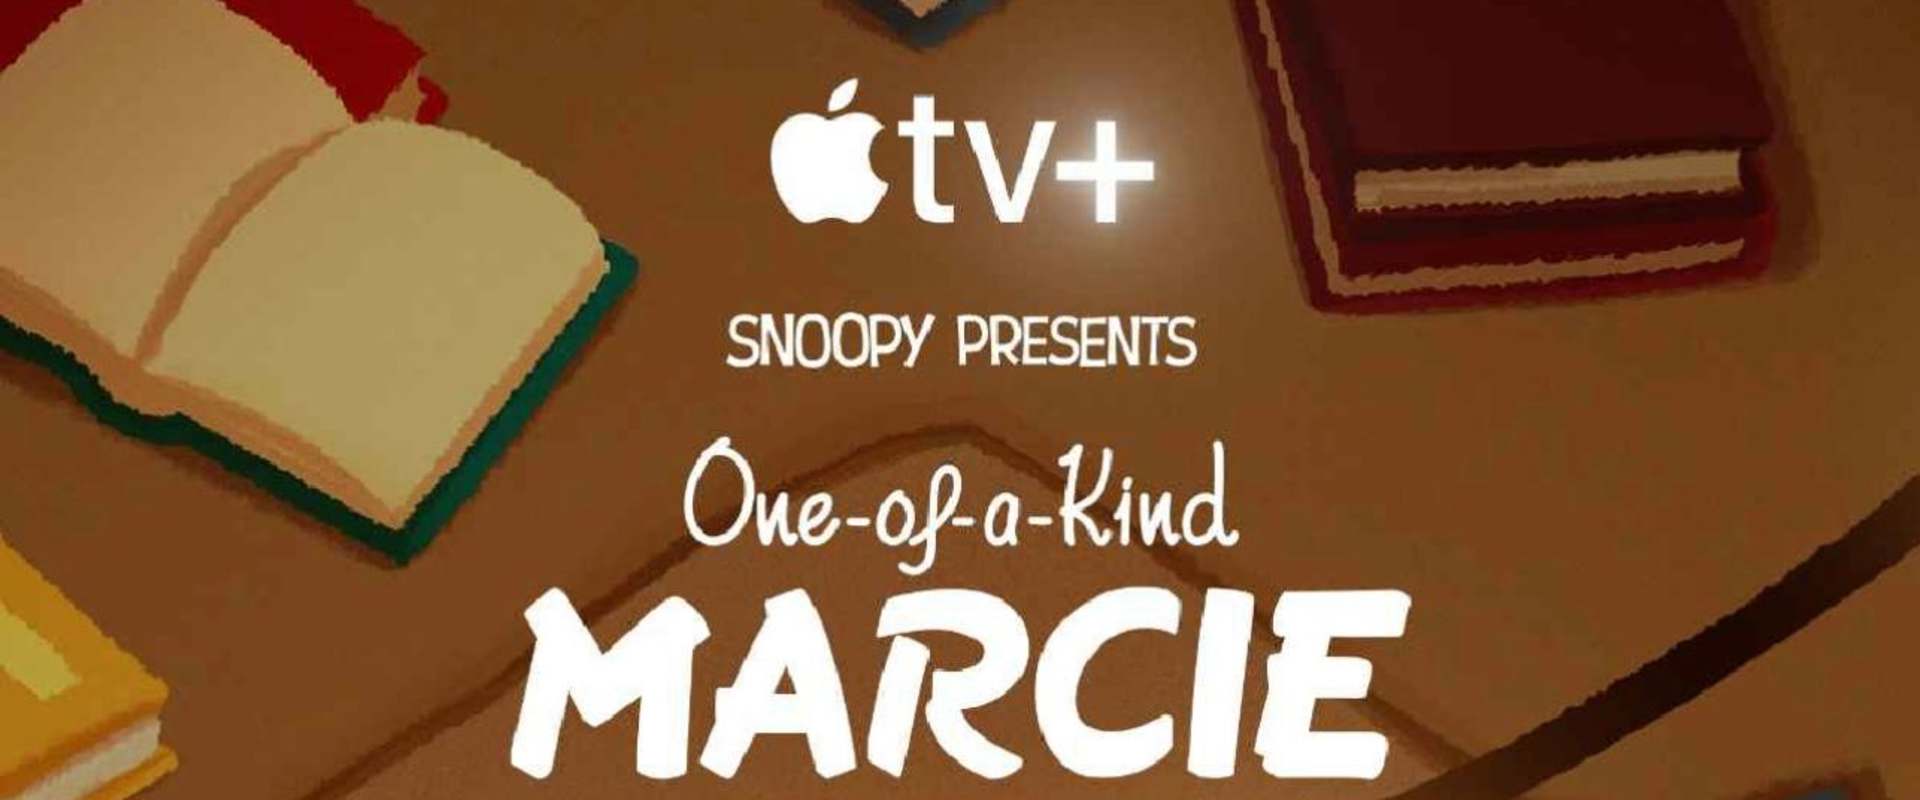 Snoopy Presents: One-of-a-Kind Marcie background 1